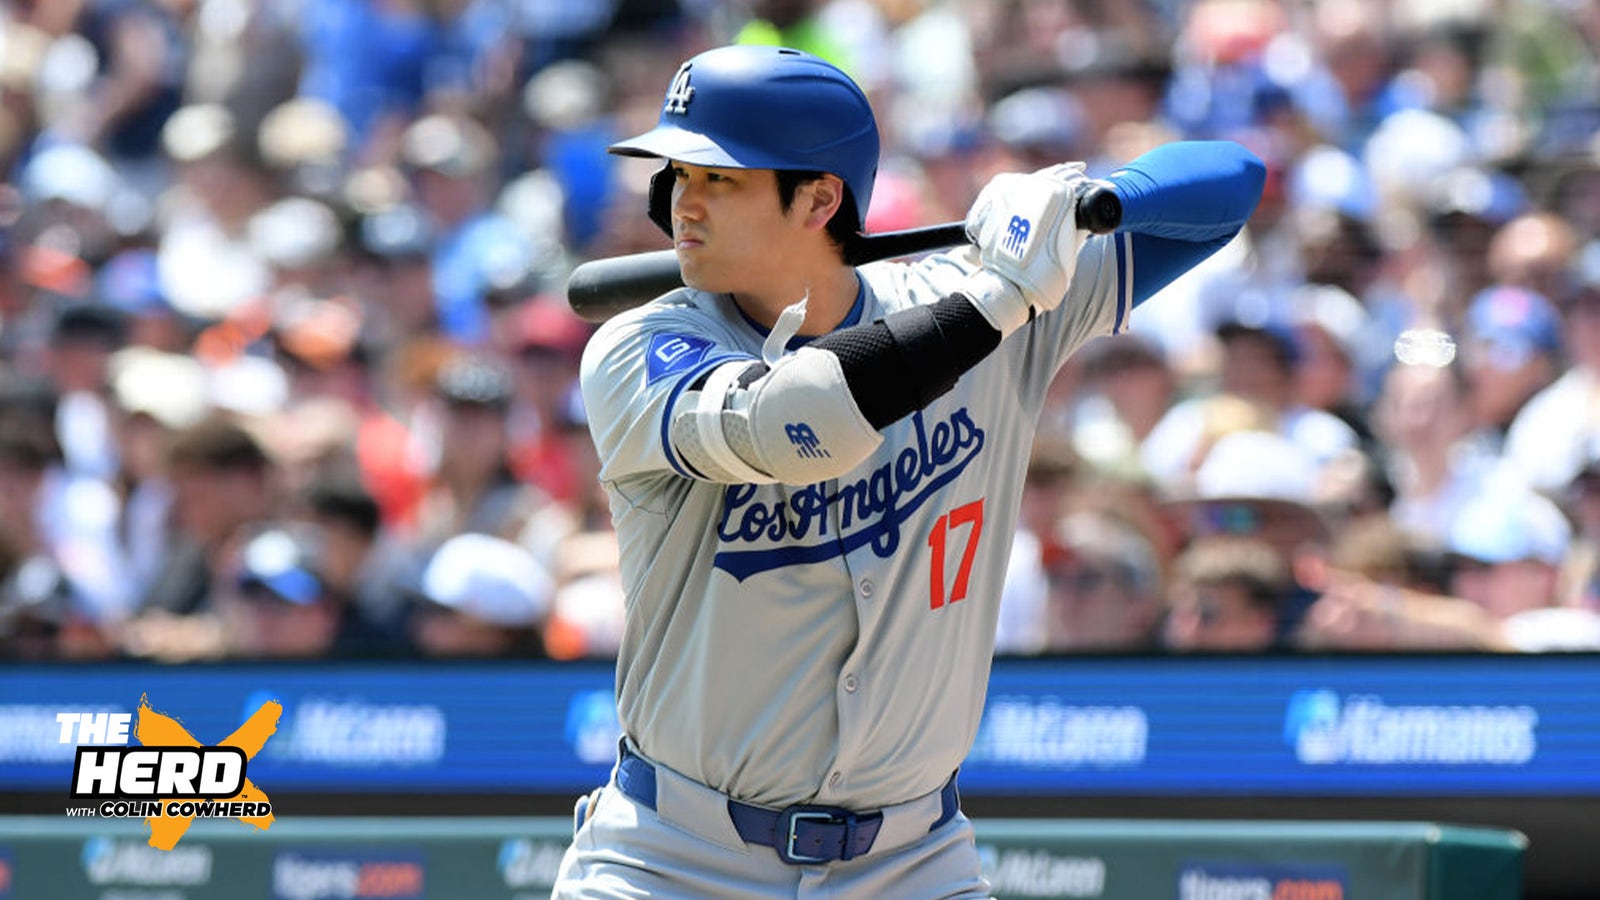 What sets Shohei Ohtani apart from MLB's other top talents